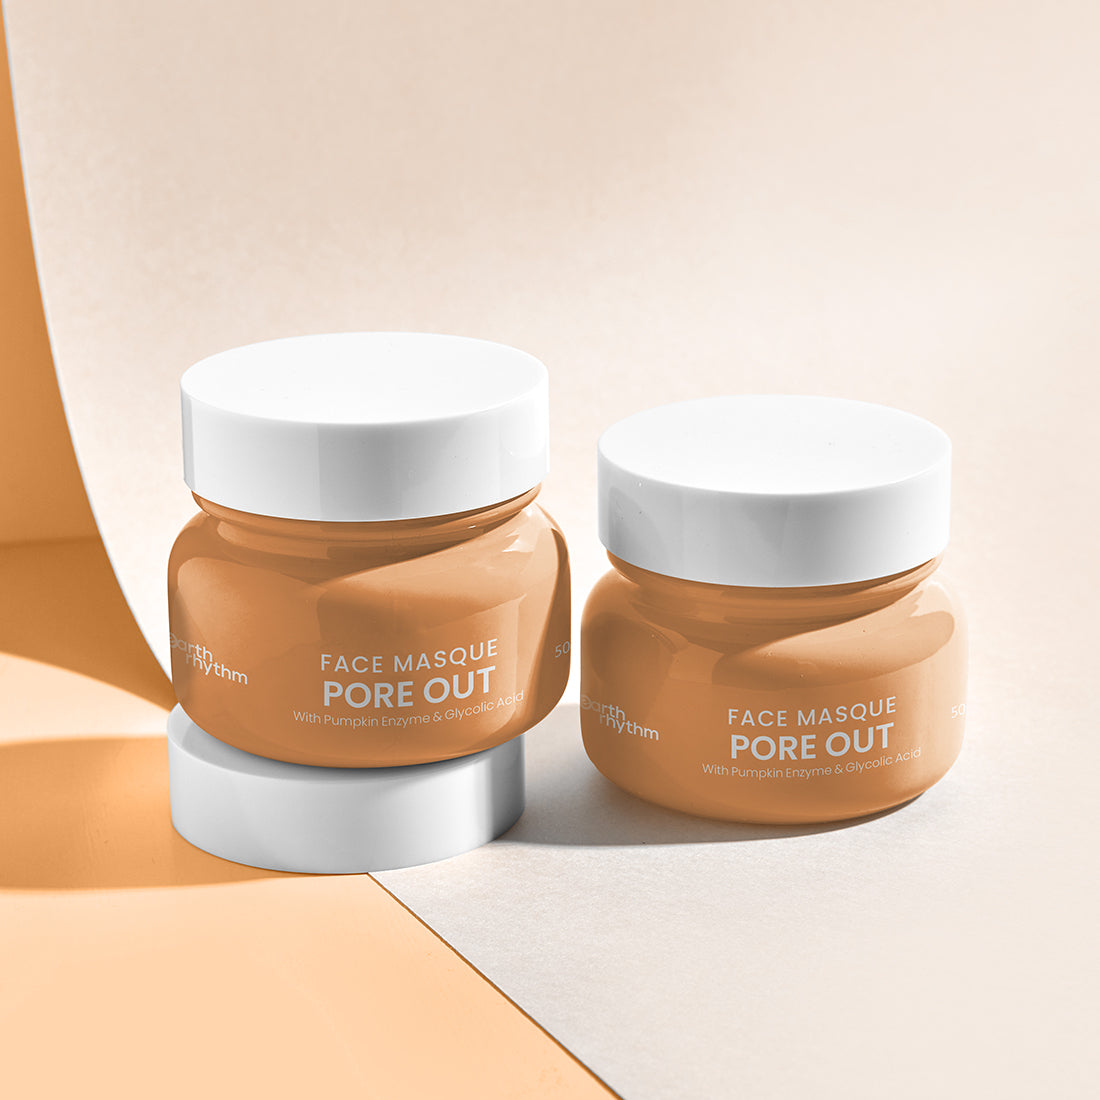 PORE OUT FACE MASQUE WITH PUMPKIN & GLYCOLIC